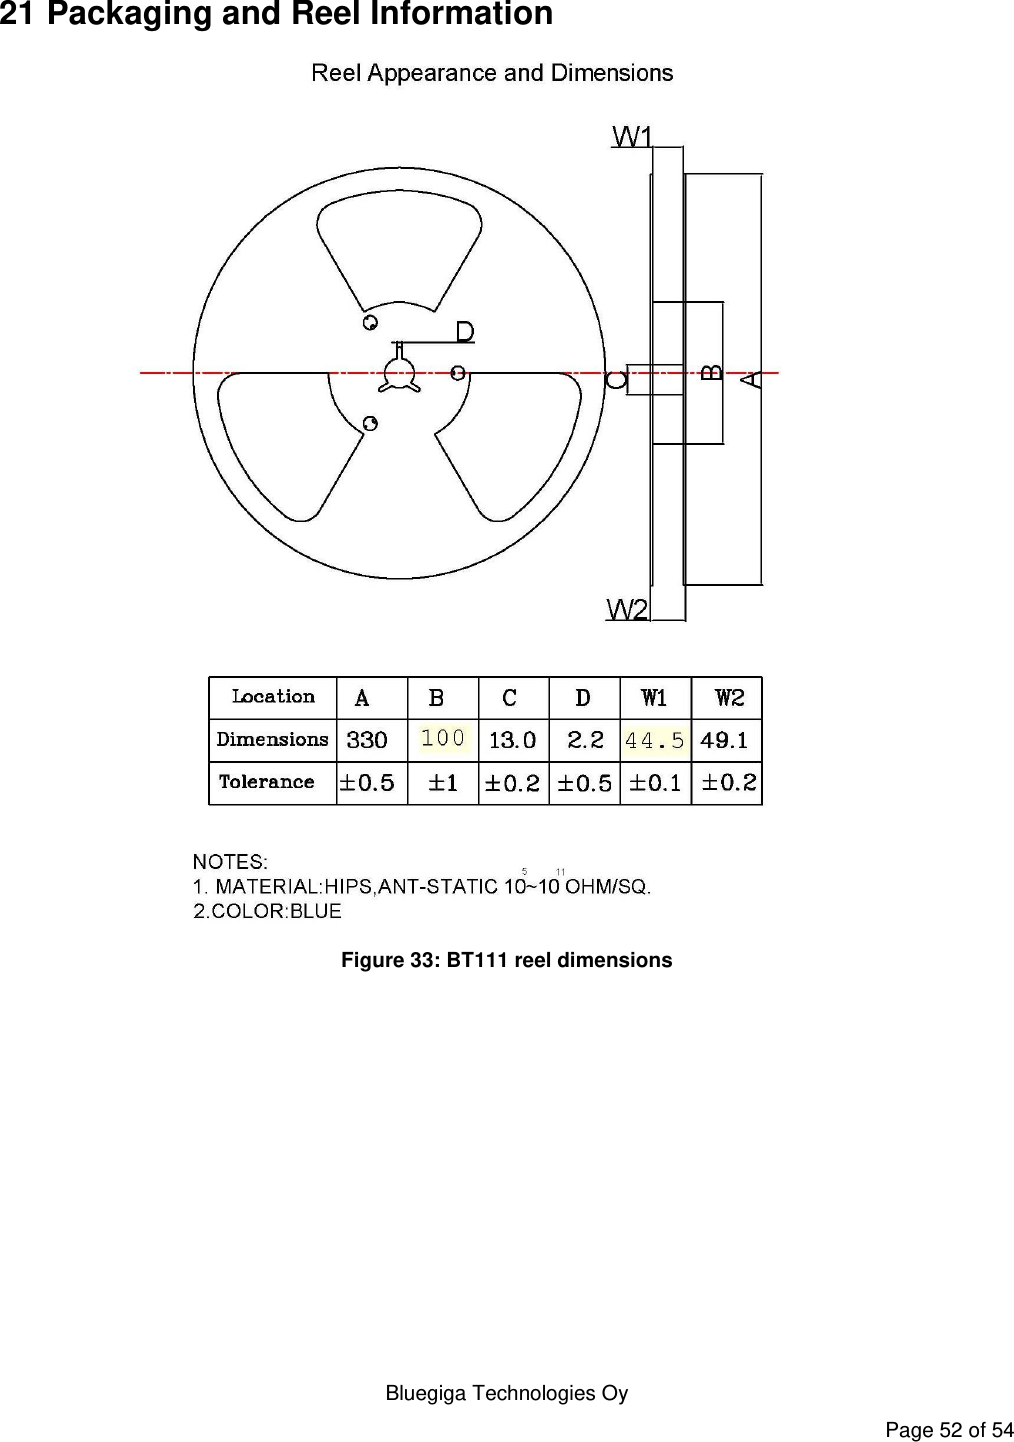    Bluegiga Technologies Oy Page 52 of 54 21 Packaging and Reel Information  Figure 33: BT111 reel dimensions 